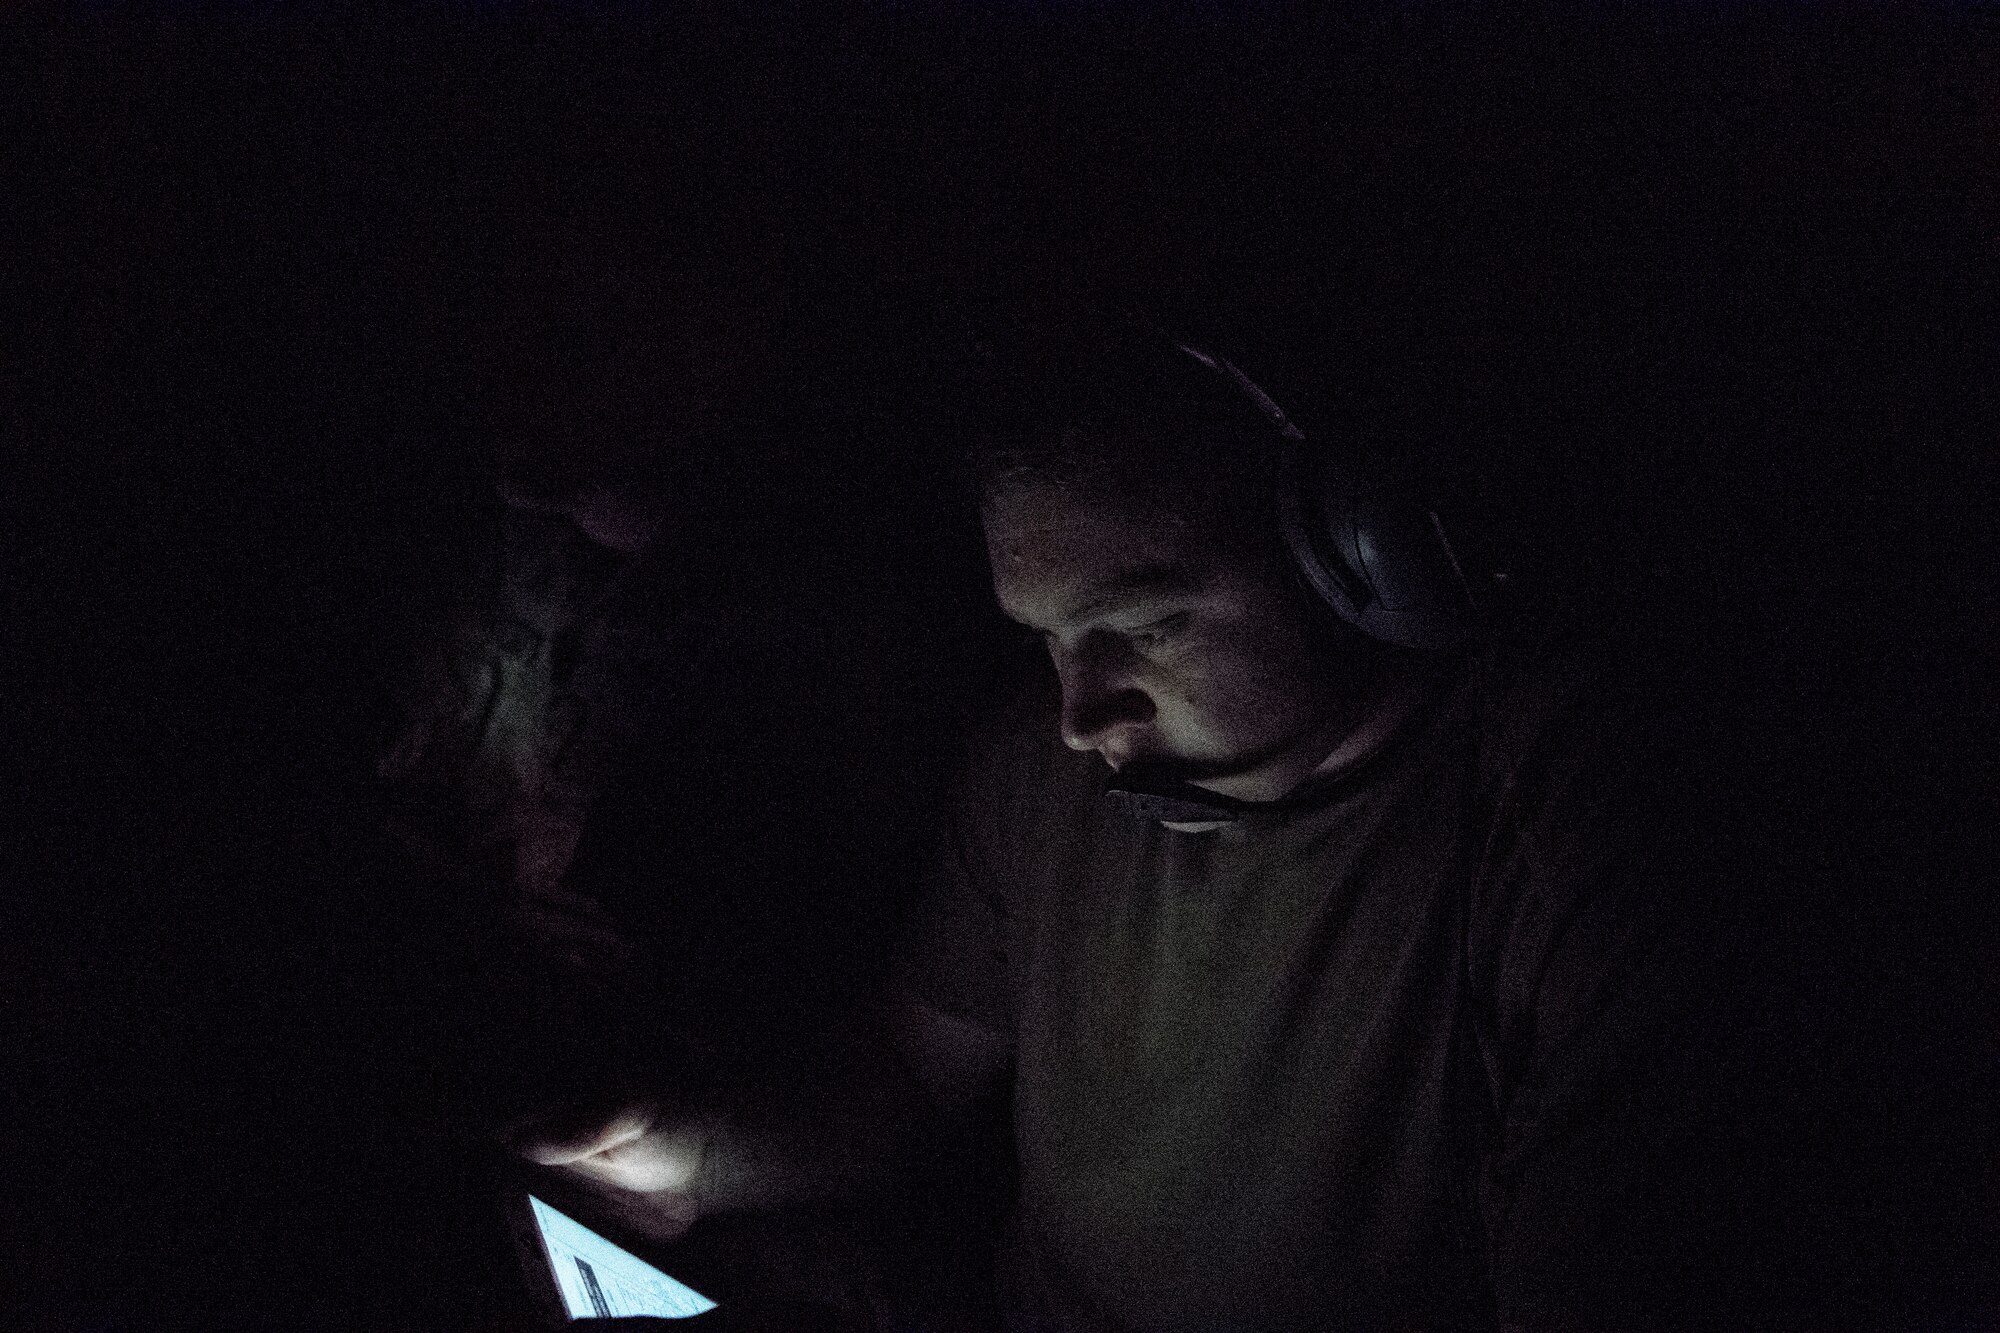 A U.S. Air Force KC-10 Extender boom operator assigned to the 908th Expeditionary Air Refueling Squadron reviews technical data above the U.S. Central Command area of responsibility, Jan. 11, 2020. The 908th EARS, deployed with U.S. Air Forces Central Comm